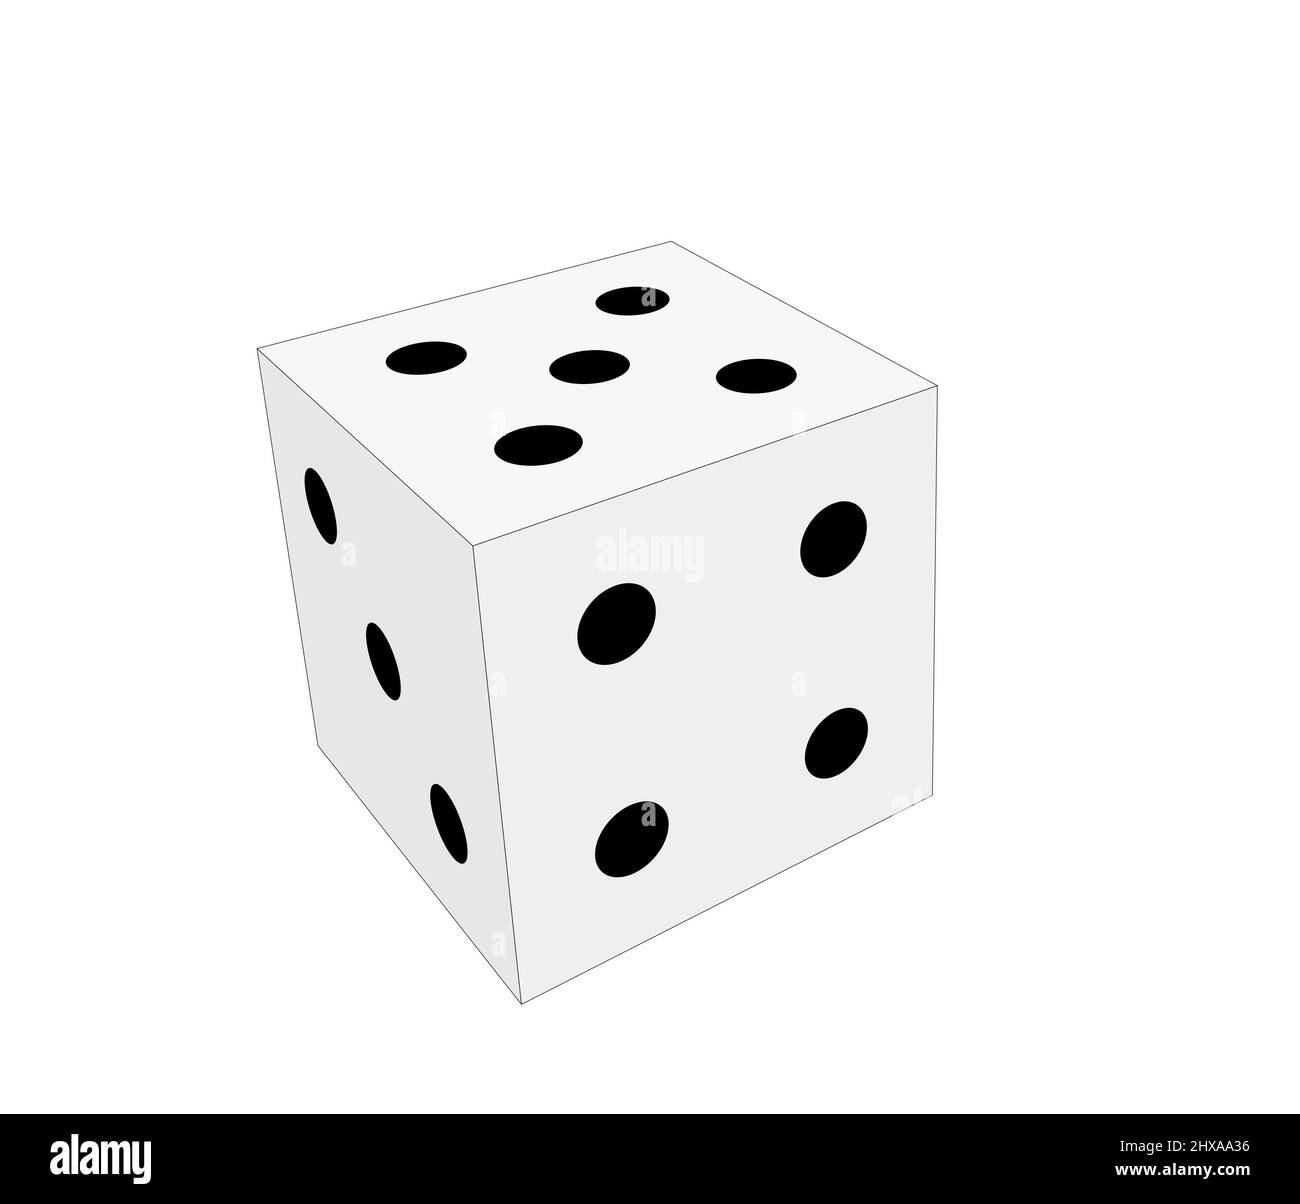 black and white simple dice with five, four and three dots. 3d perspective view illustration isolated on white background Stock Photo